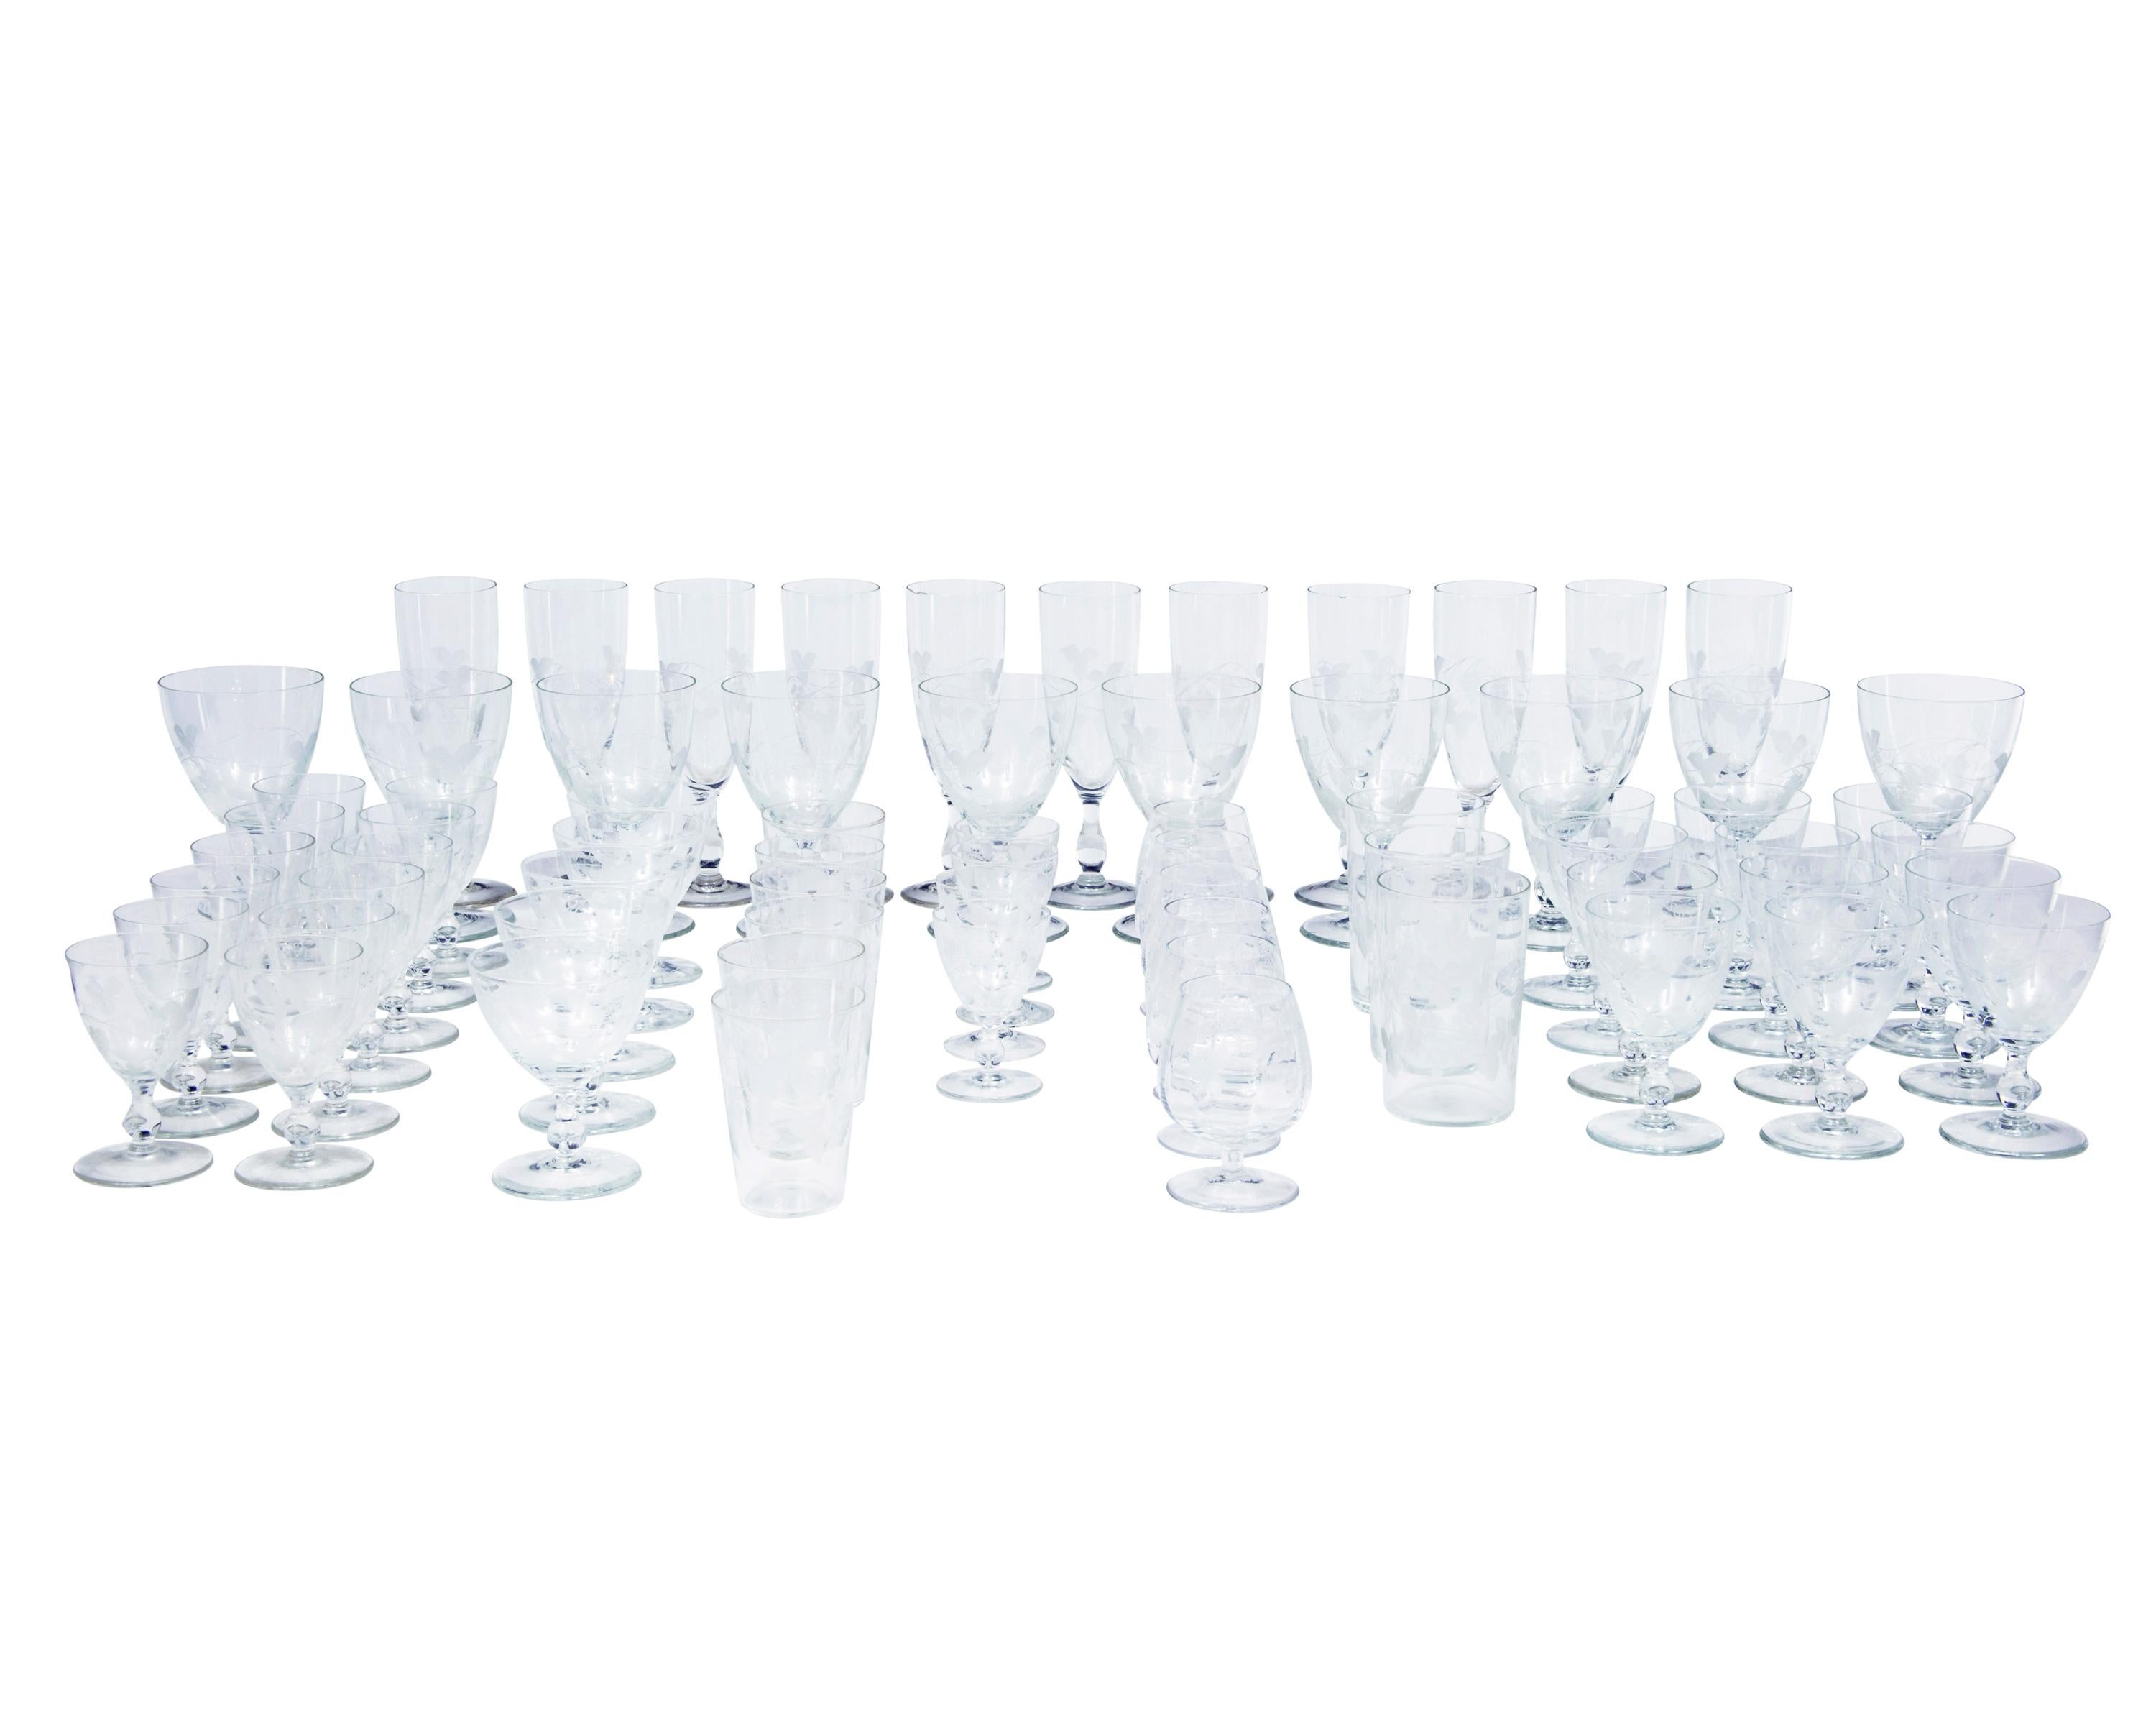 A fine collection of 1930's riihimaki savoy vine etched glasses fine set of 69 glasses from the well known finnish makers rihhimaki.

11 champayne flutes

10 large wine glasses

12 small wine glasses

12 port glasses

6 brandy glasses

6 small